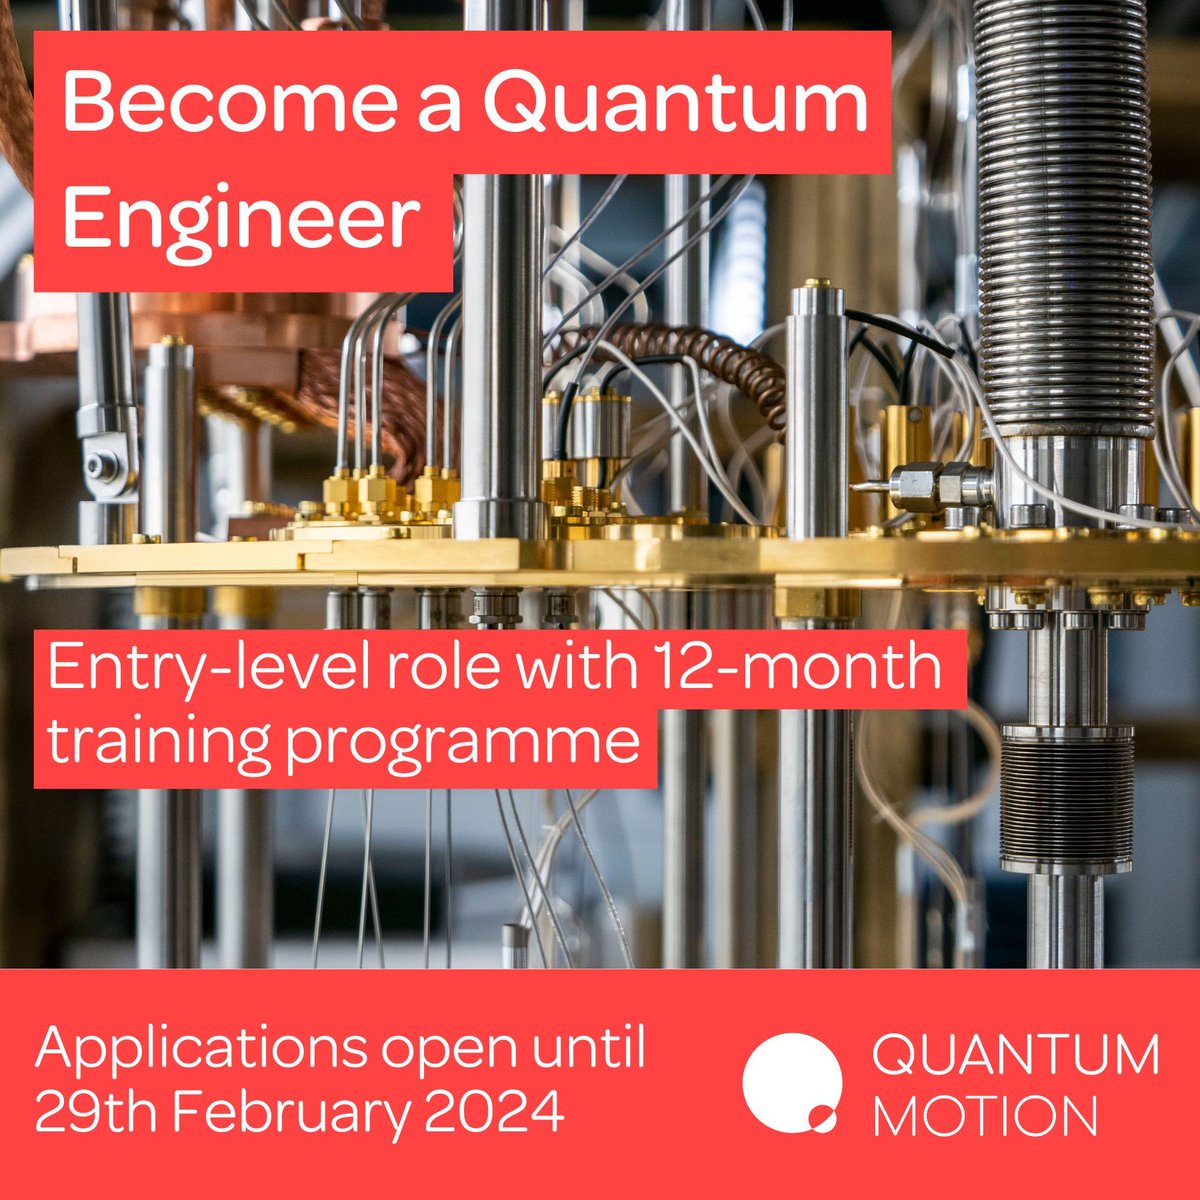 Dreaming about becoming a quantum engineer? Apply to our early career programme! This is a permanent, entry-level role with a 12-month training programme to help kickstart your profession in industrial quantum engineering. Apply: buff.ly/3Sxb9Kj